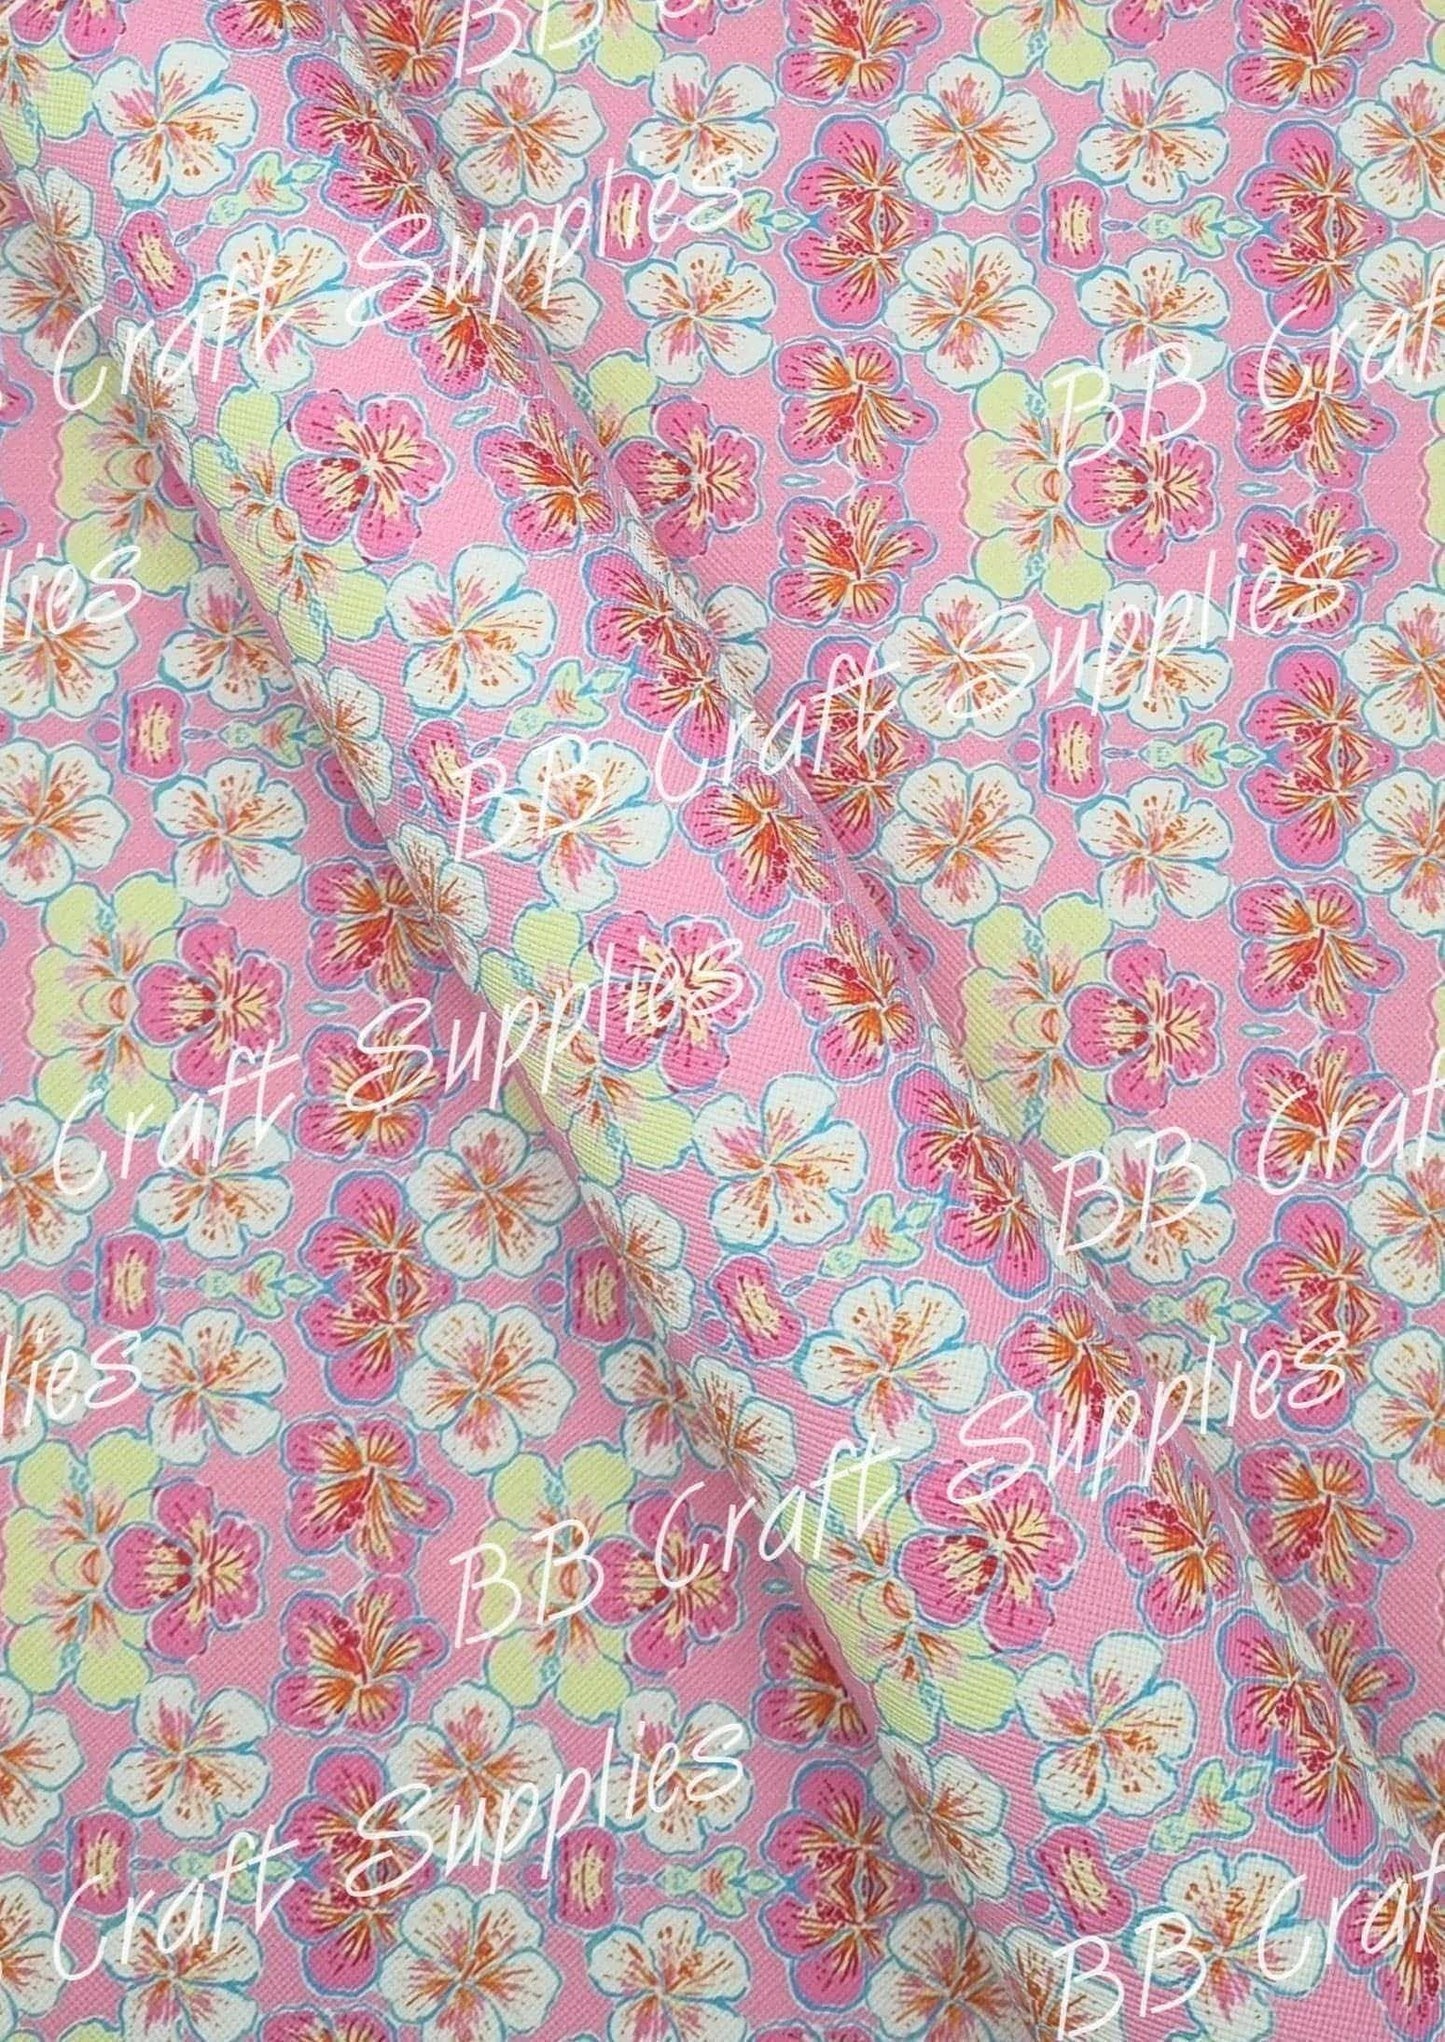 Pink & Yellow Hibiscus Faux Leather - Faux, Faux Leather, floral, Flower, hibiscus, Leather, leatherette, pink & Yellow, tropical - Bare Butler Faux Leather Supplies 